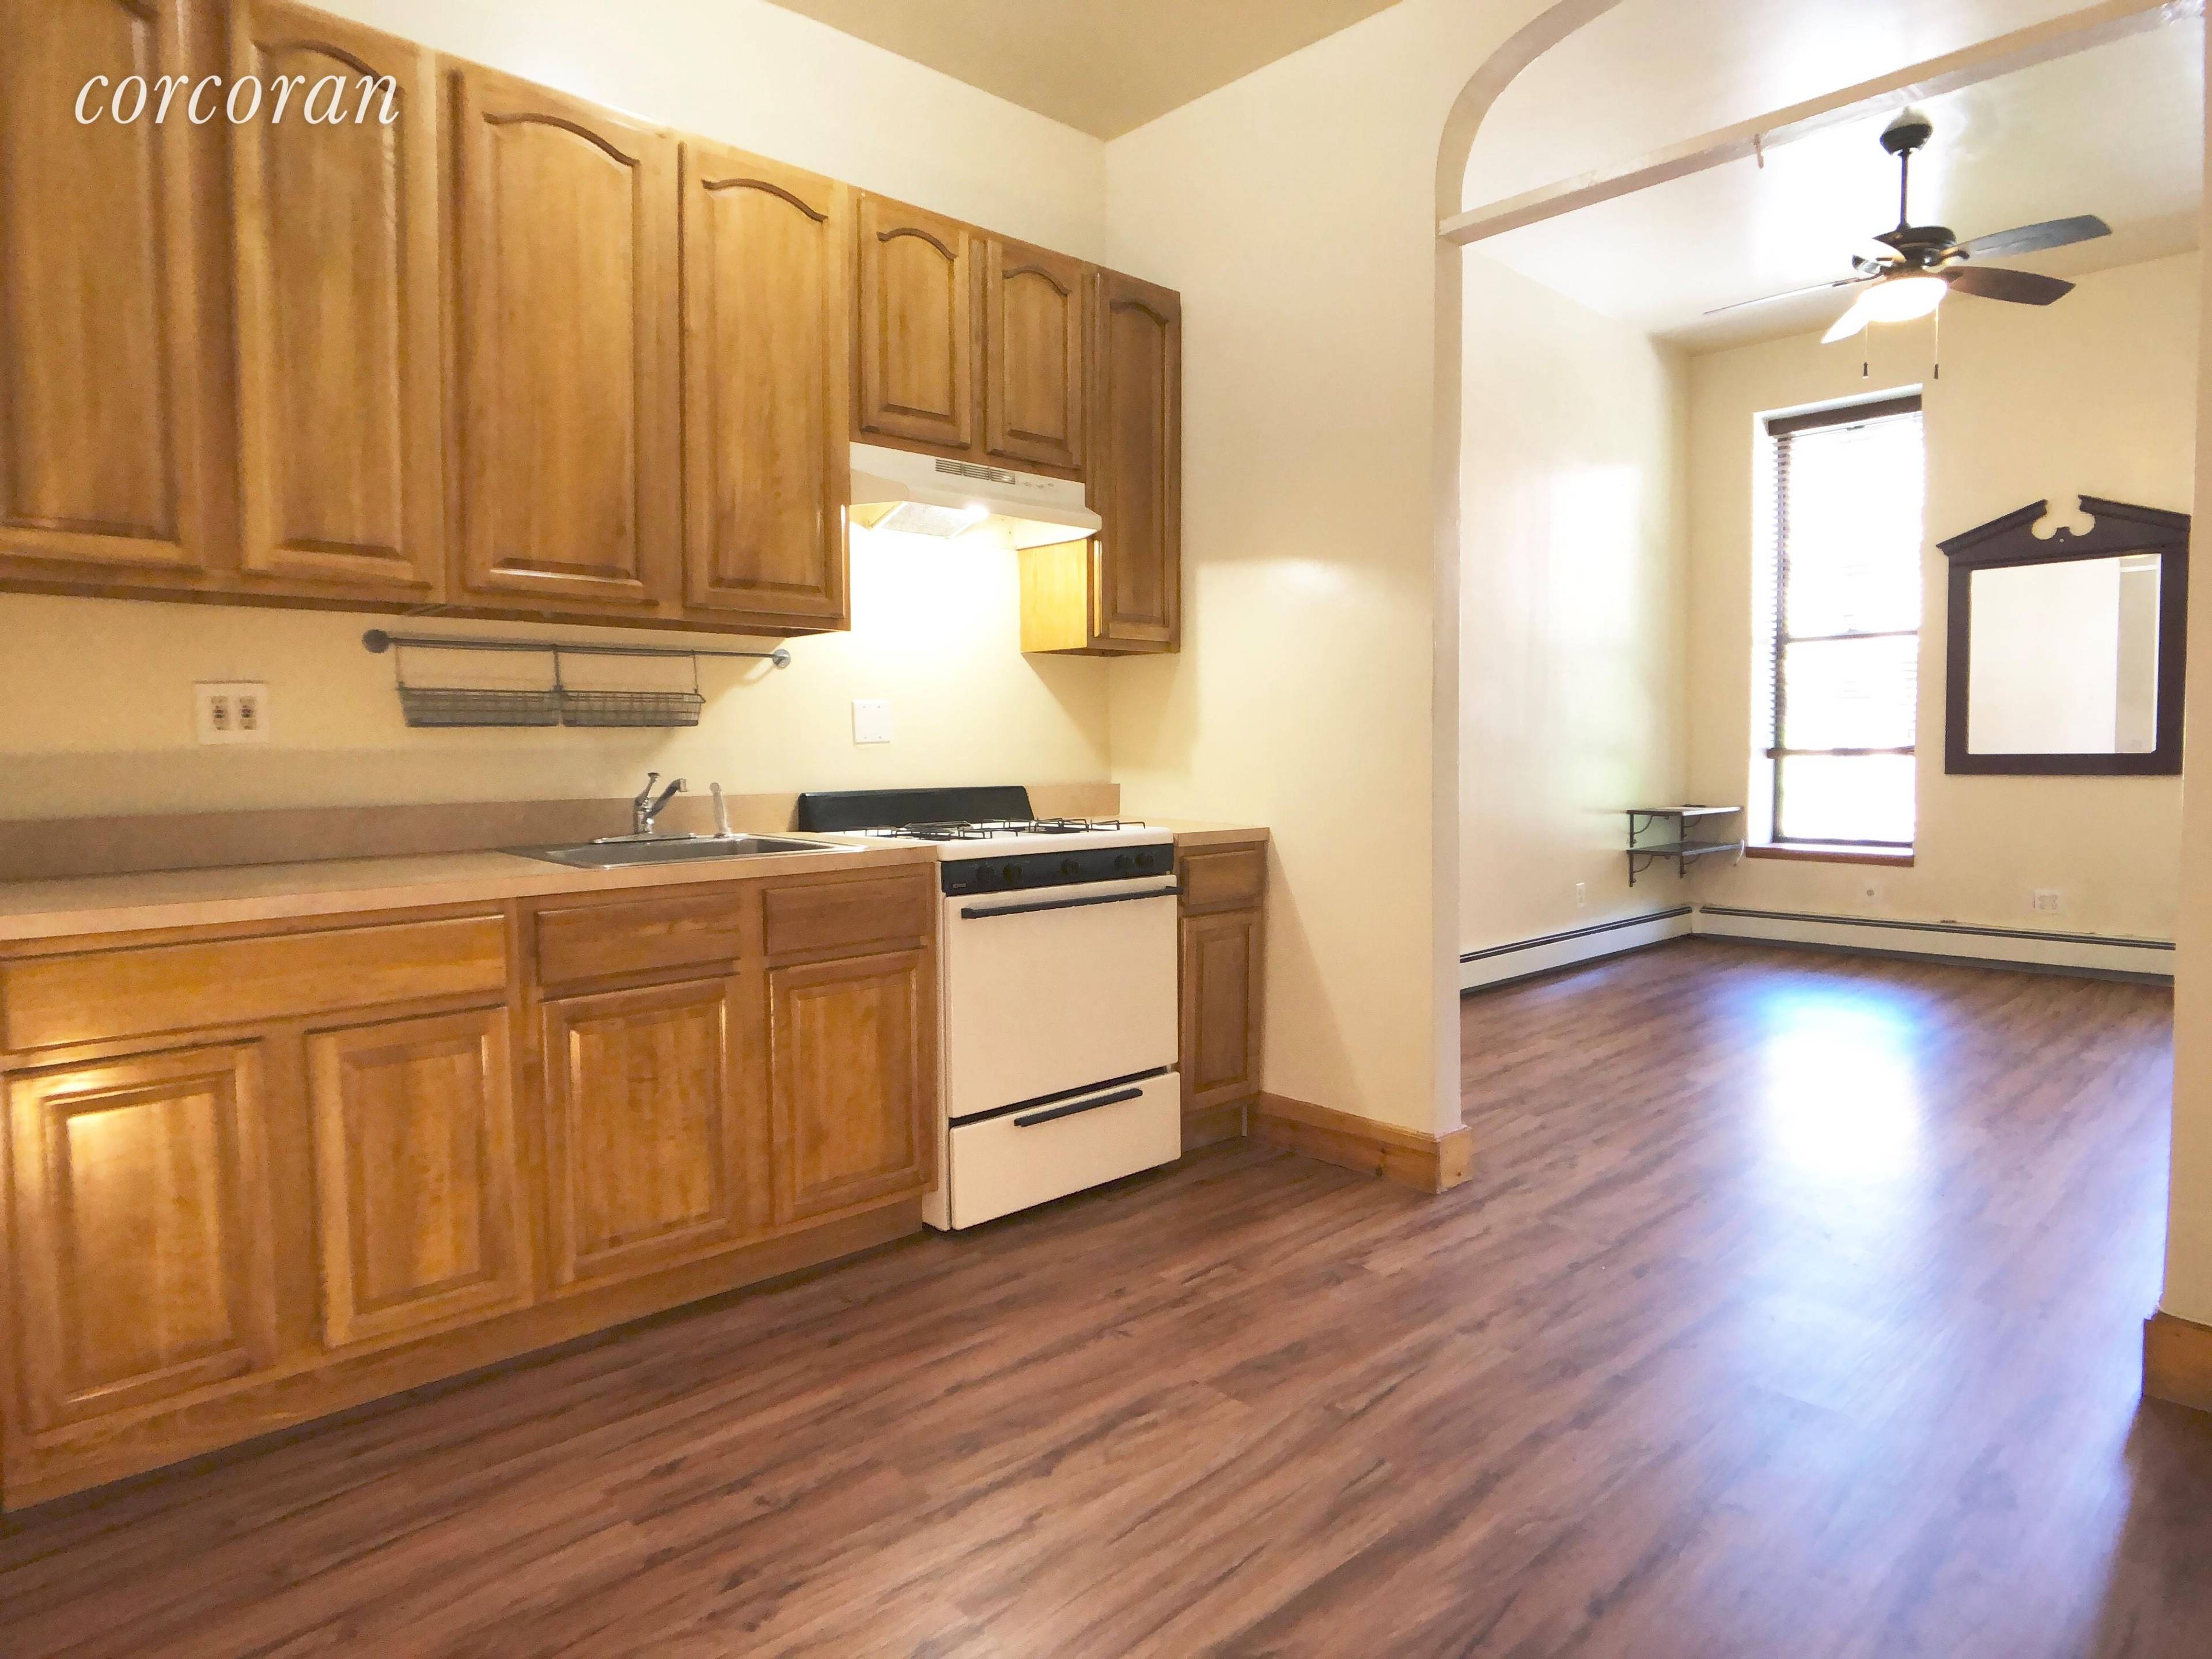 Get ready to move right into this immaculate parlour level two bedroom brownstone floor through !